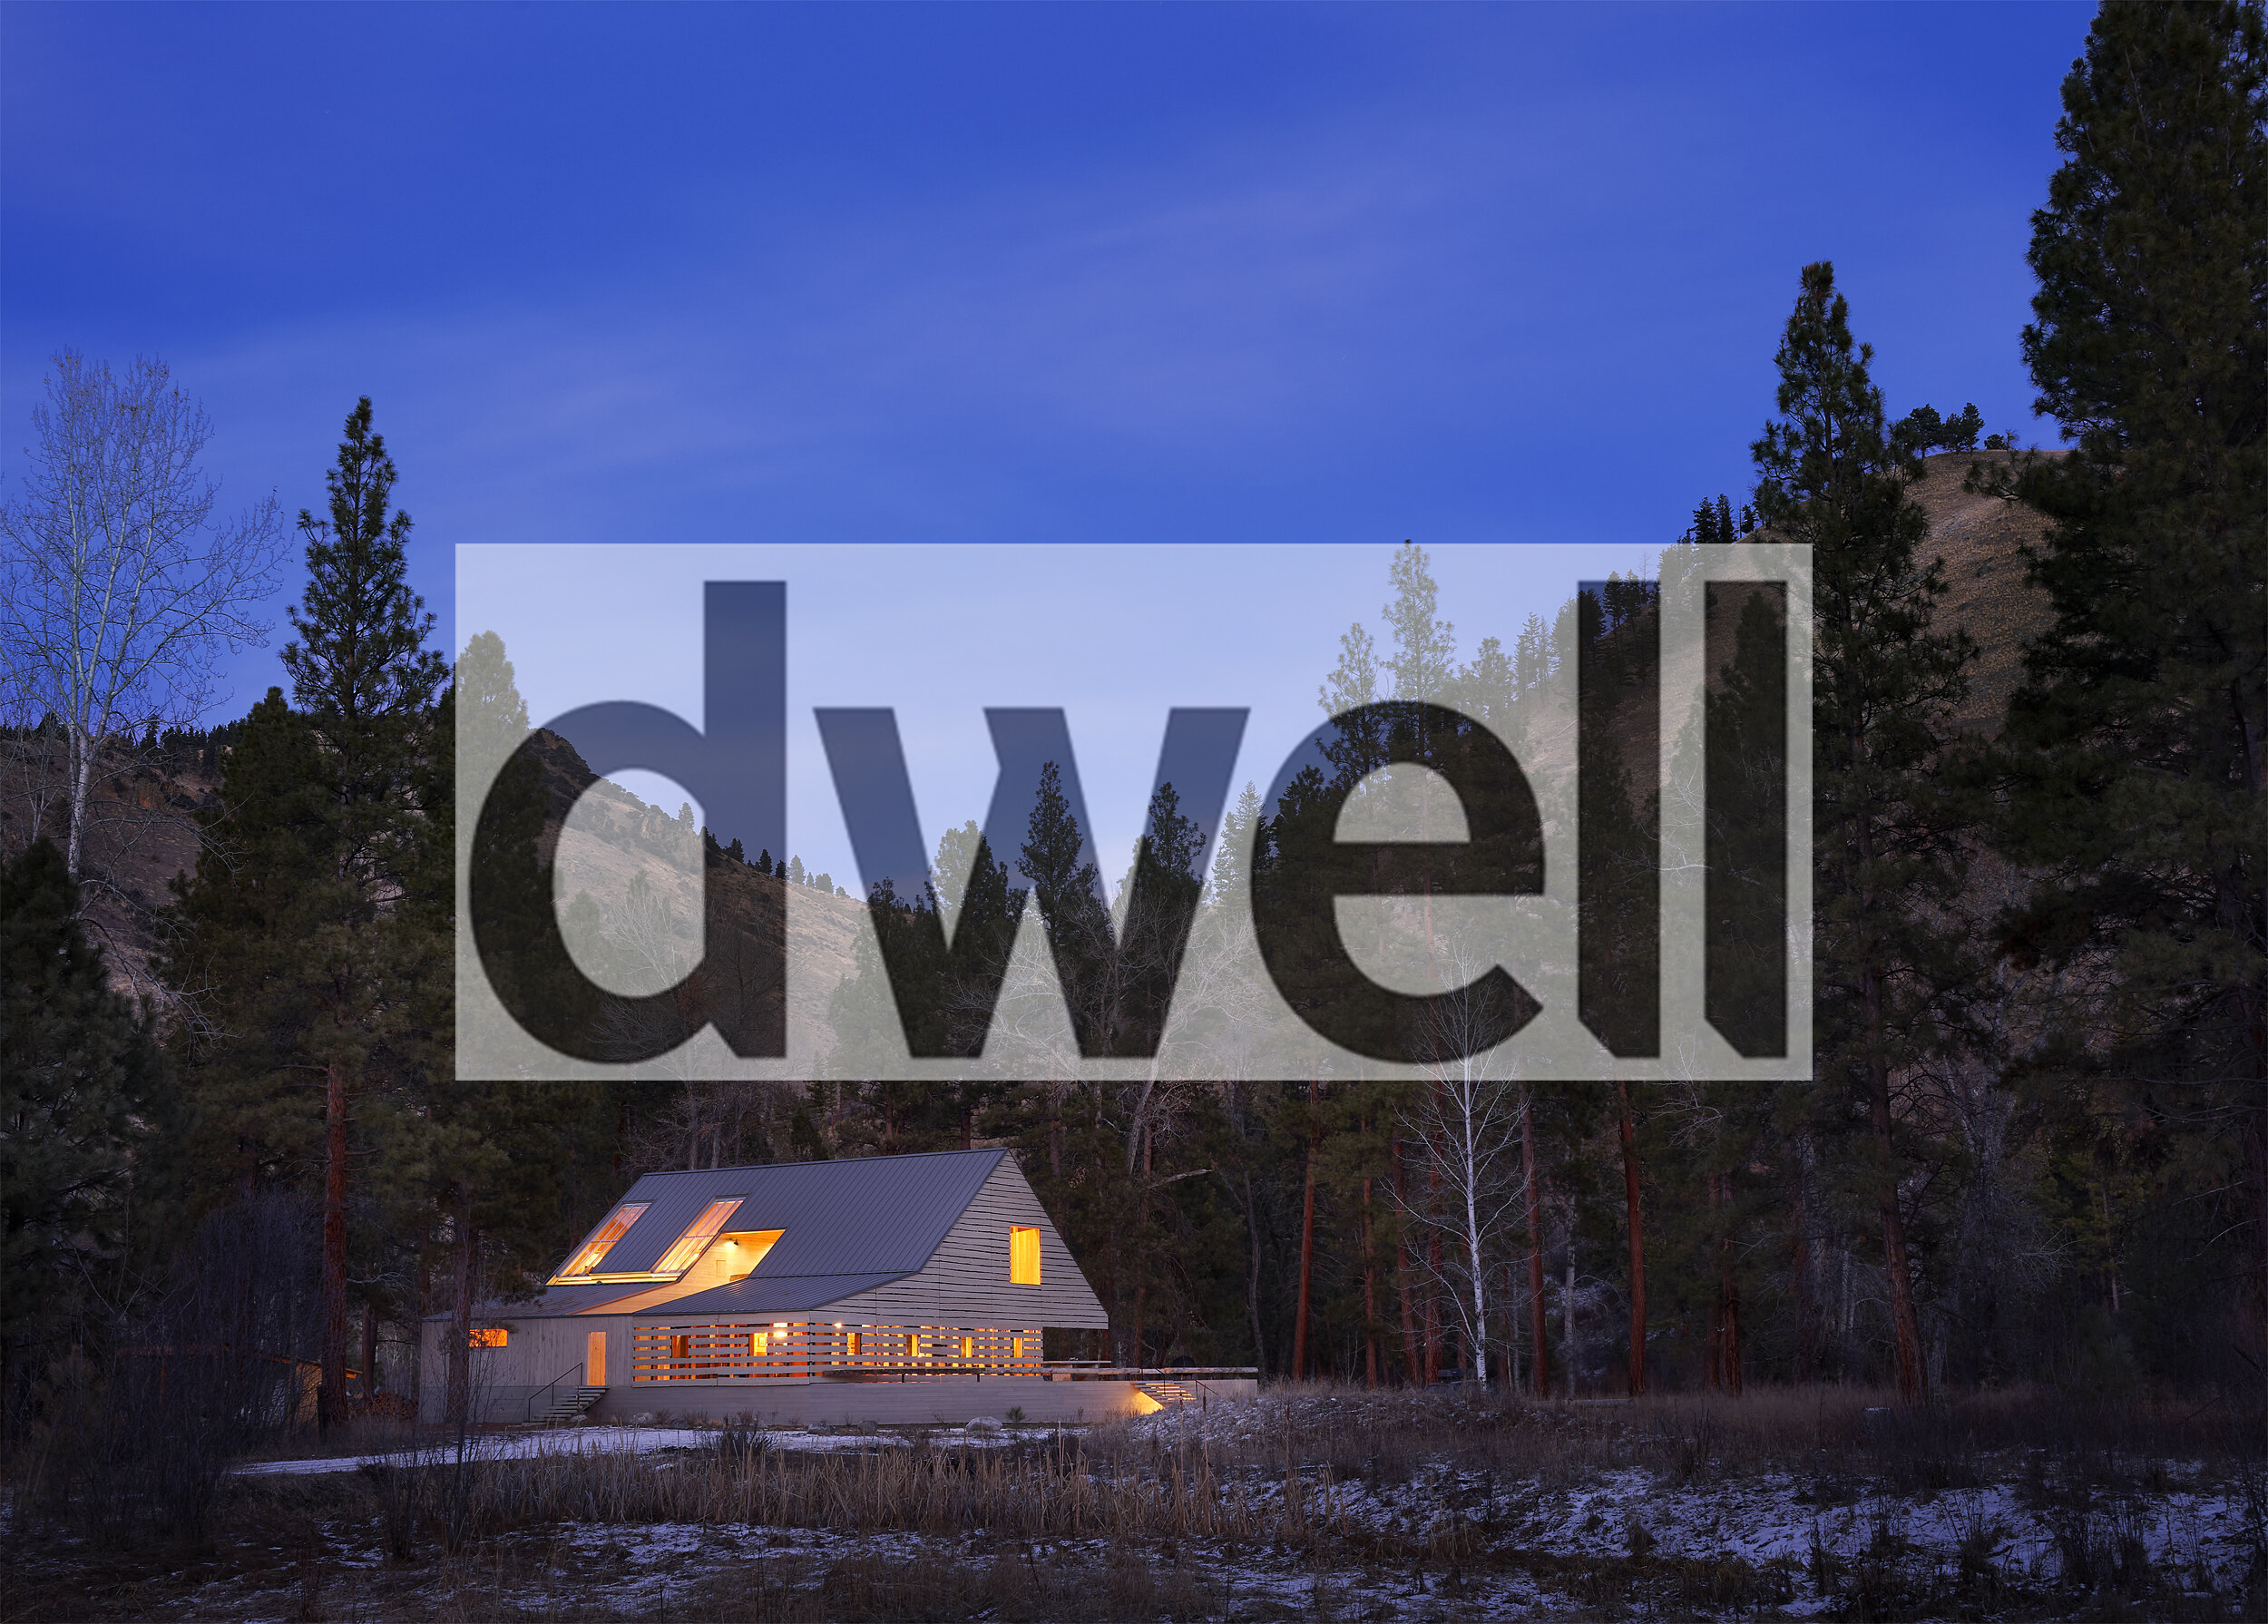 Silhouette House - Dwell